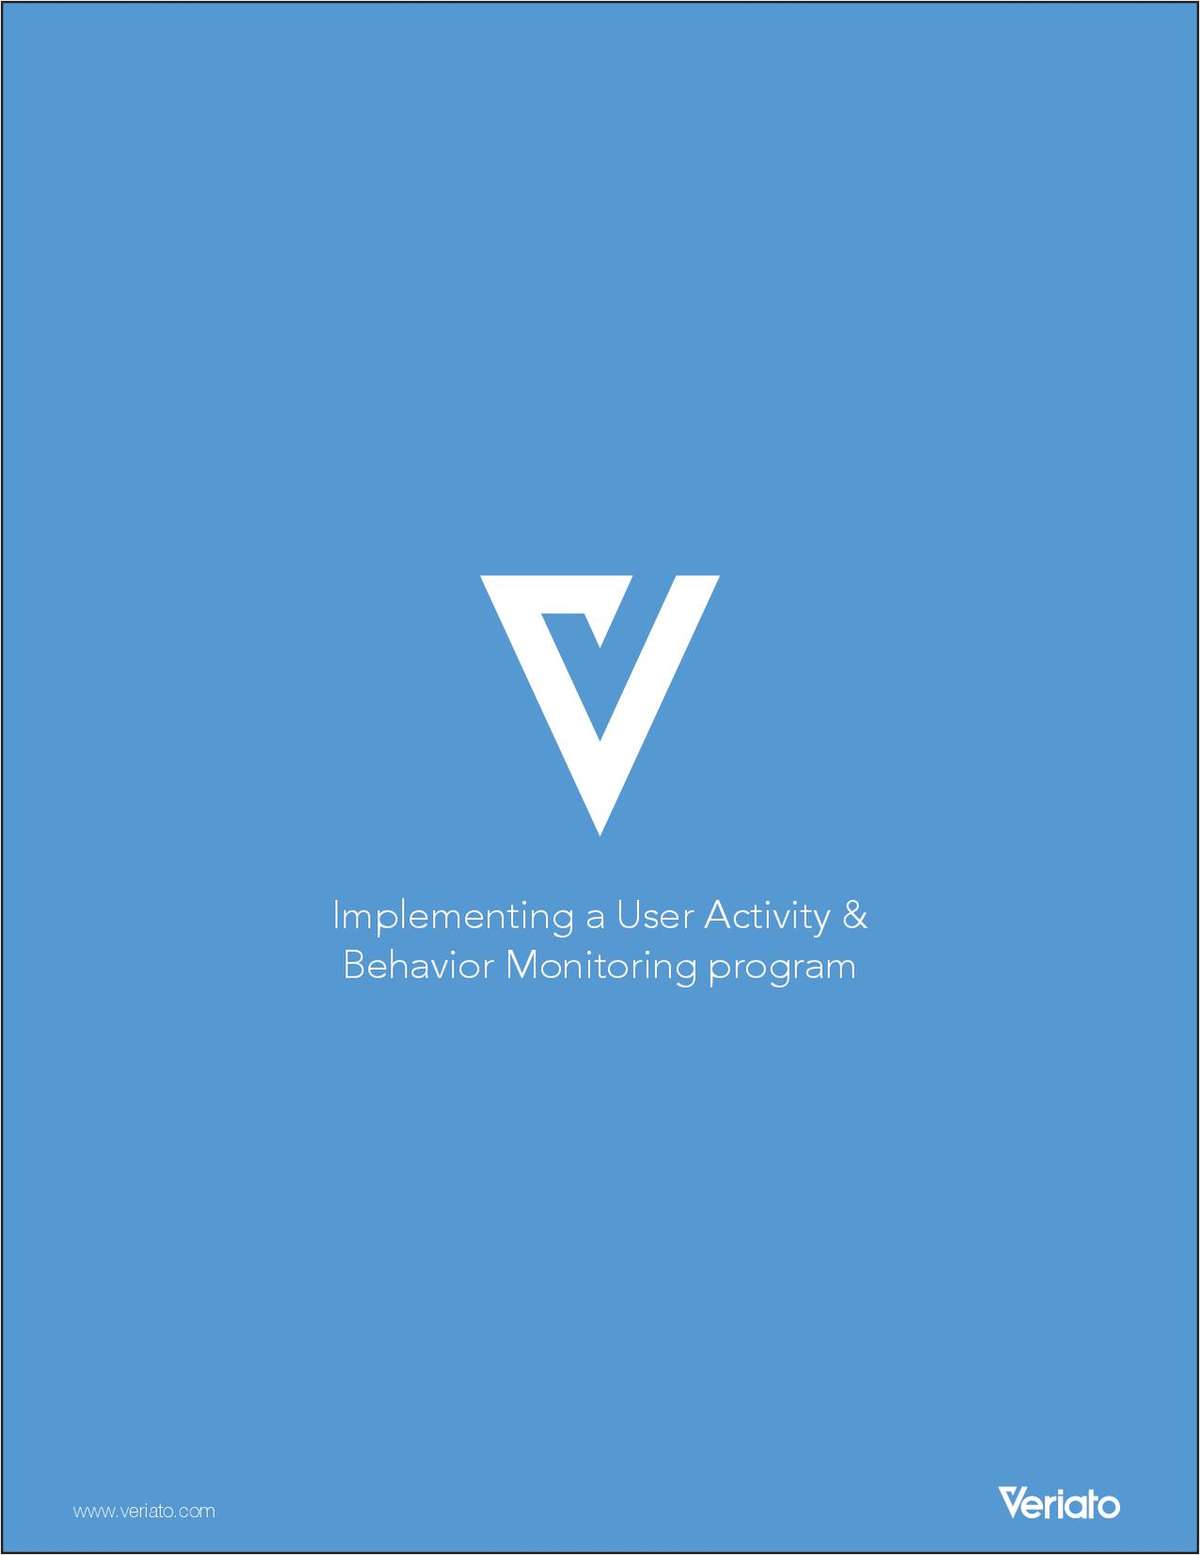 Implementing a User Activity and Behavior Monitoring Program